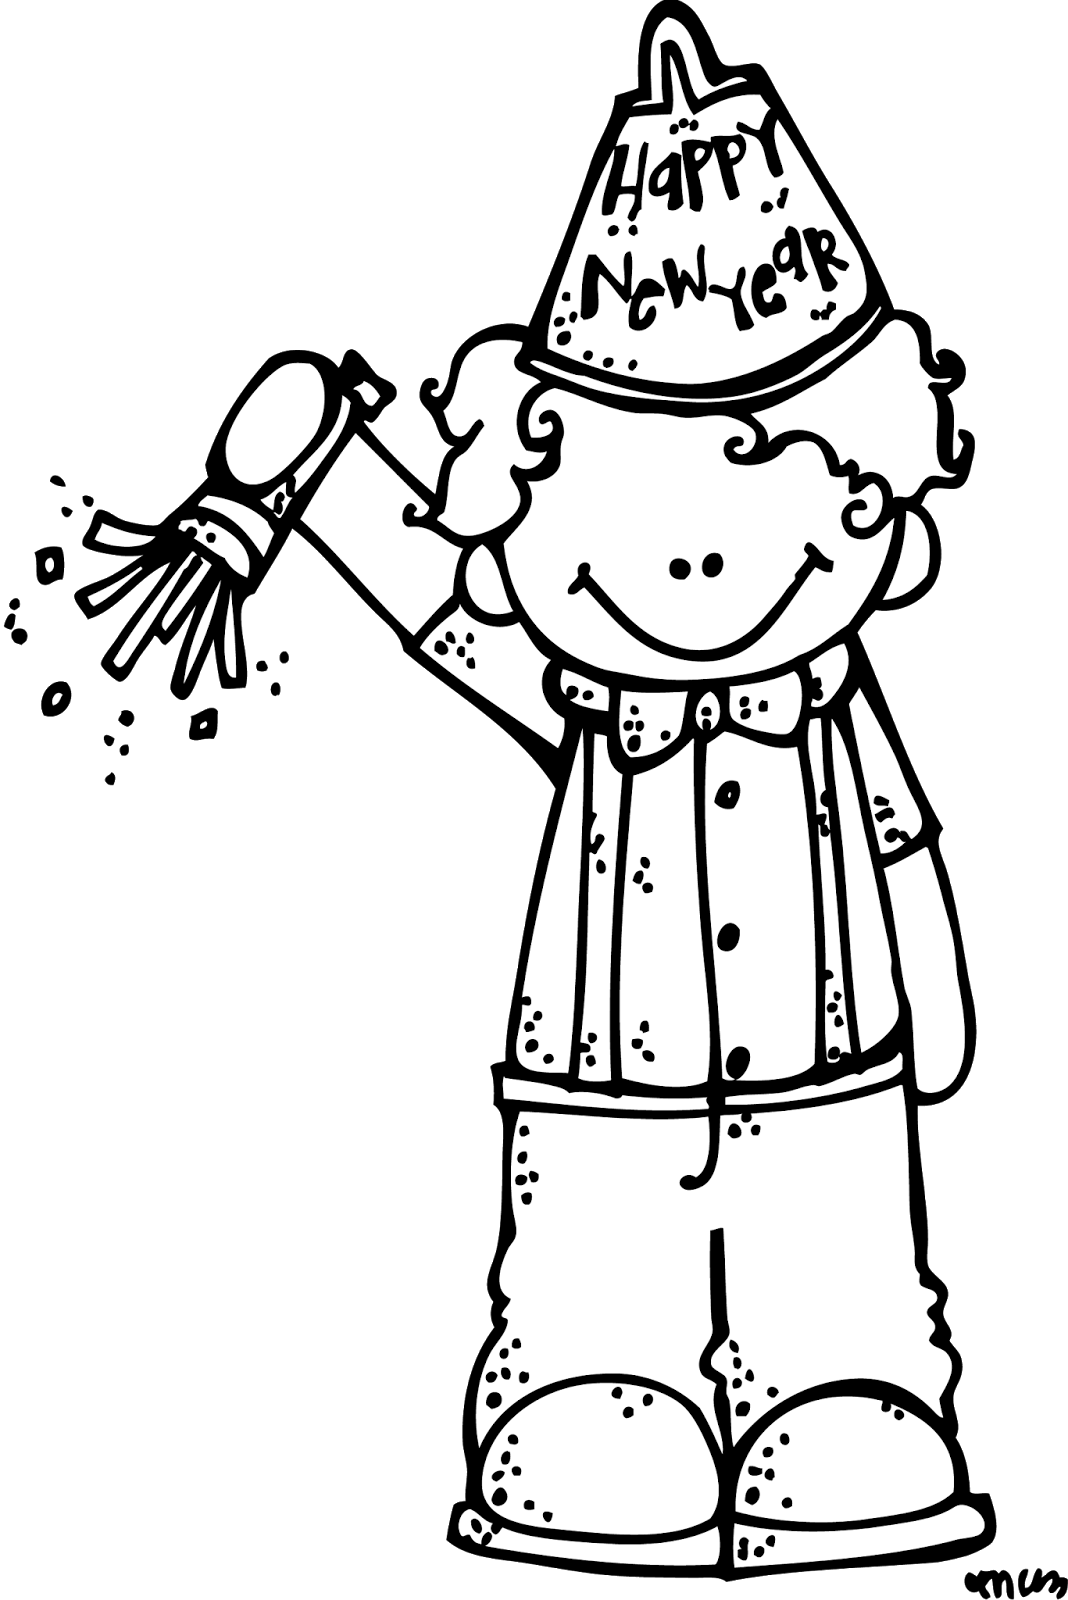 happy new year 2014 clip art black and white - photo #31